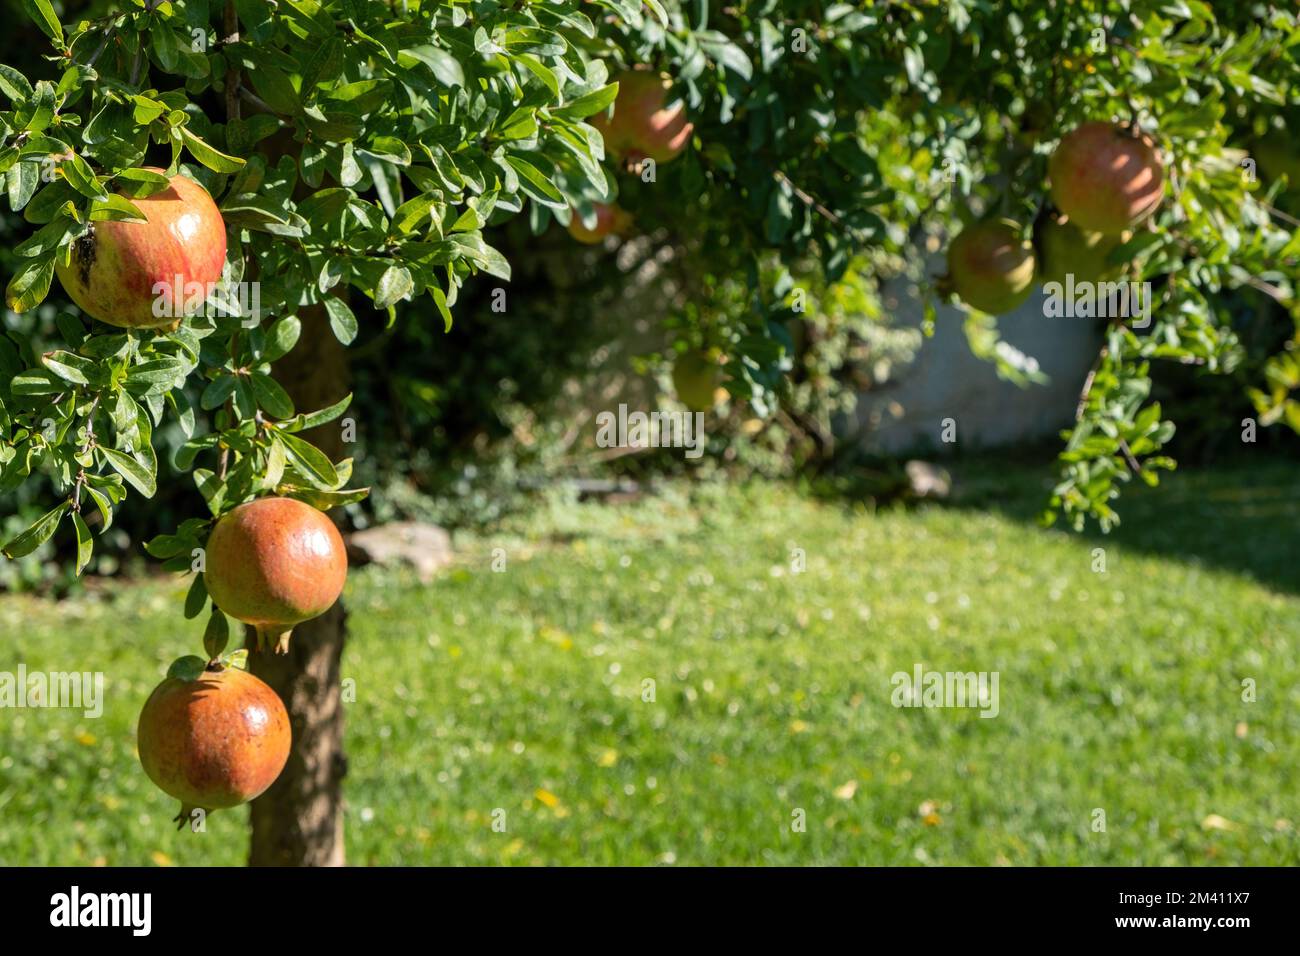 Pomegranate tree and ripe fruits hanging, harvest season. Punica granatum foliage and fruit with red juicy sweet seed Stock Photo